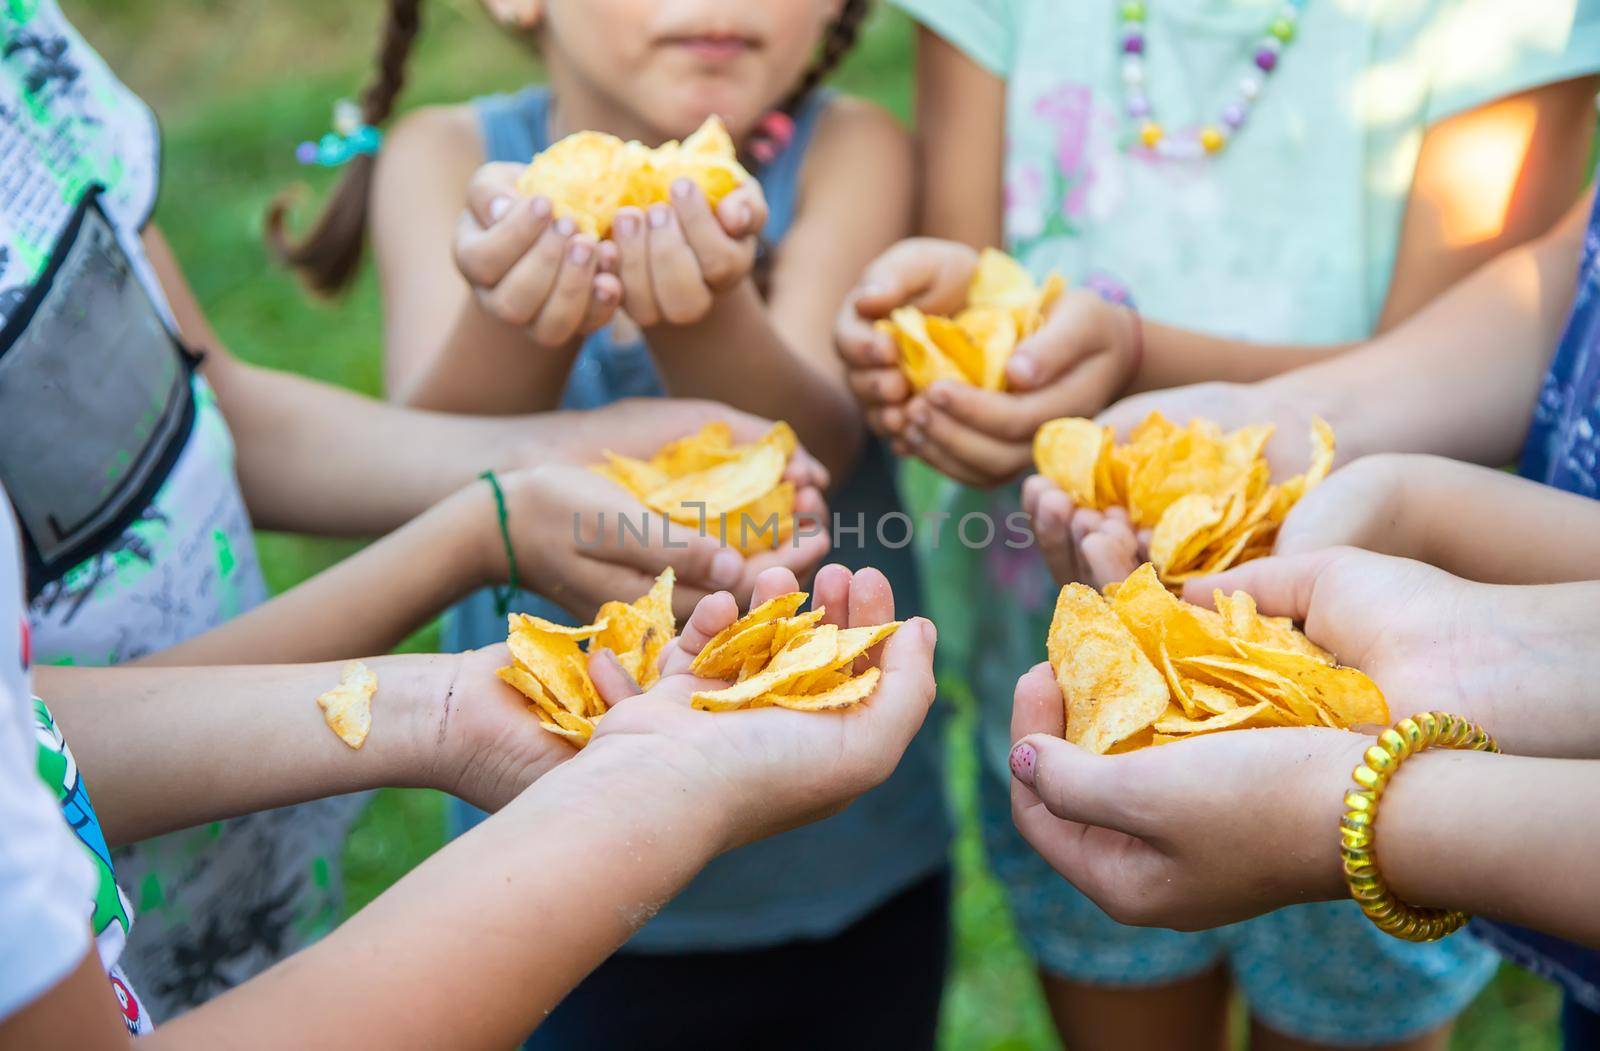 Children are holding chips in their hands. Selective focus. by yanadjana